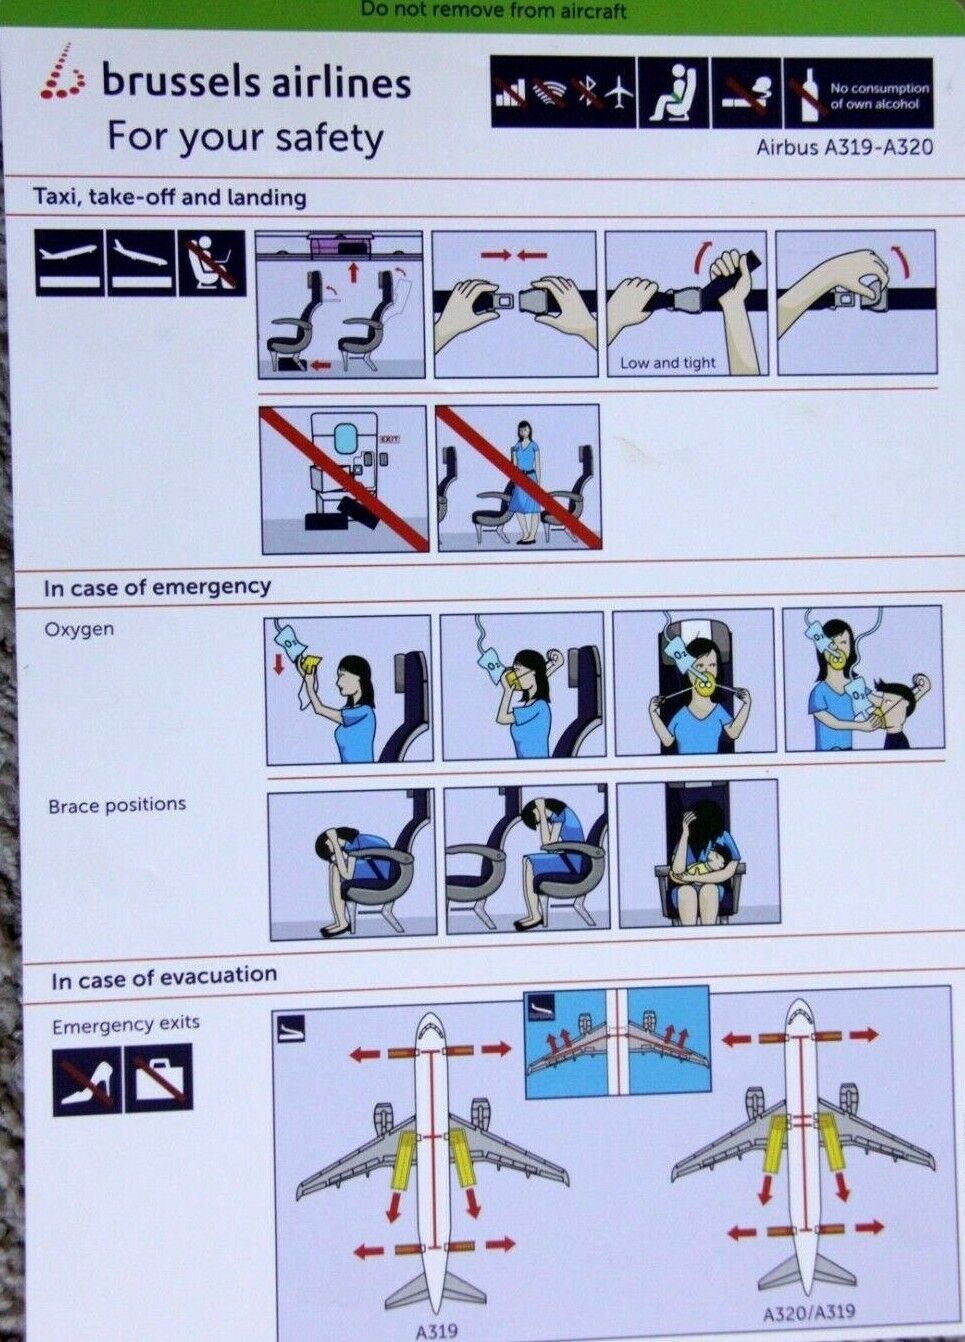 BRUSSELS AIRLINES AIRBUS A319-A320 SAFETY CARD 